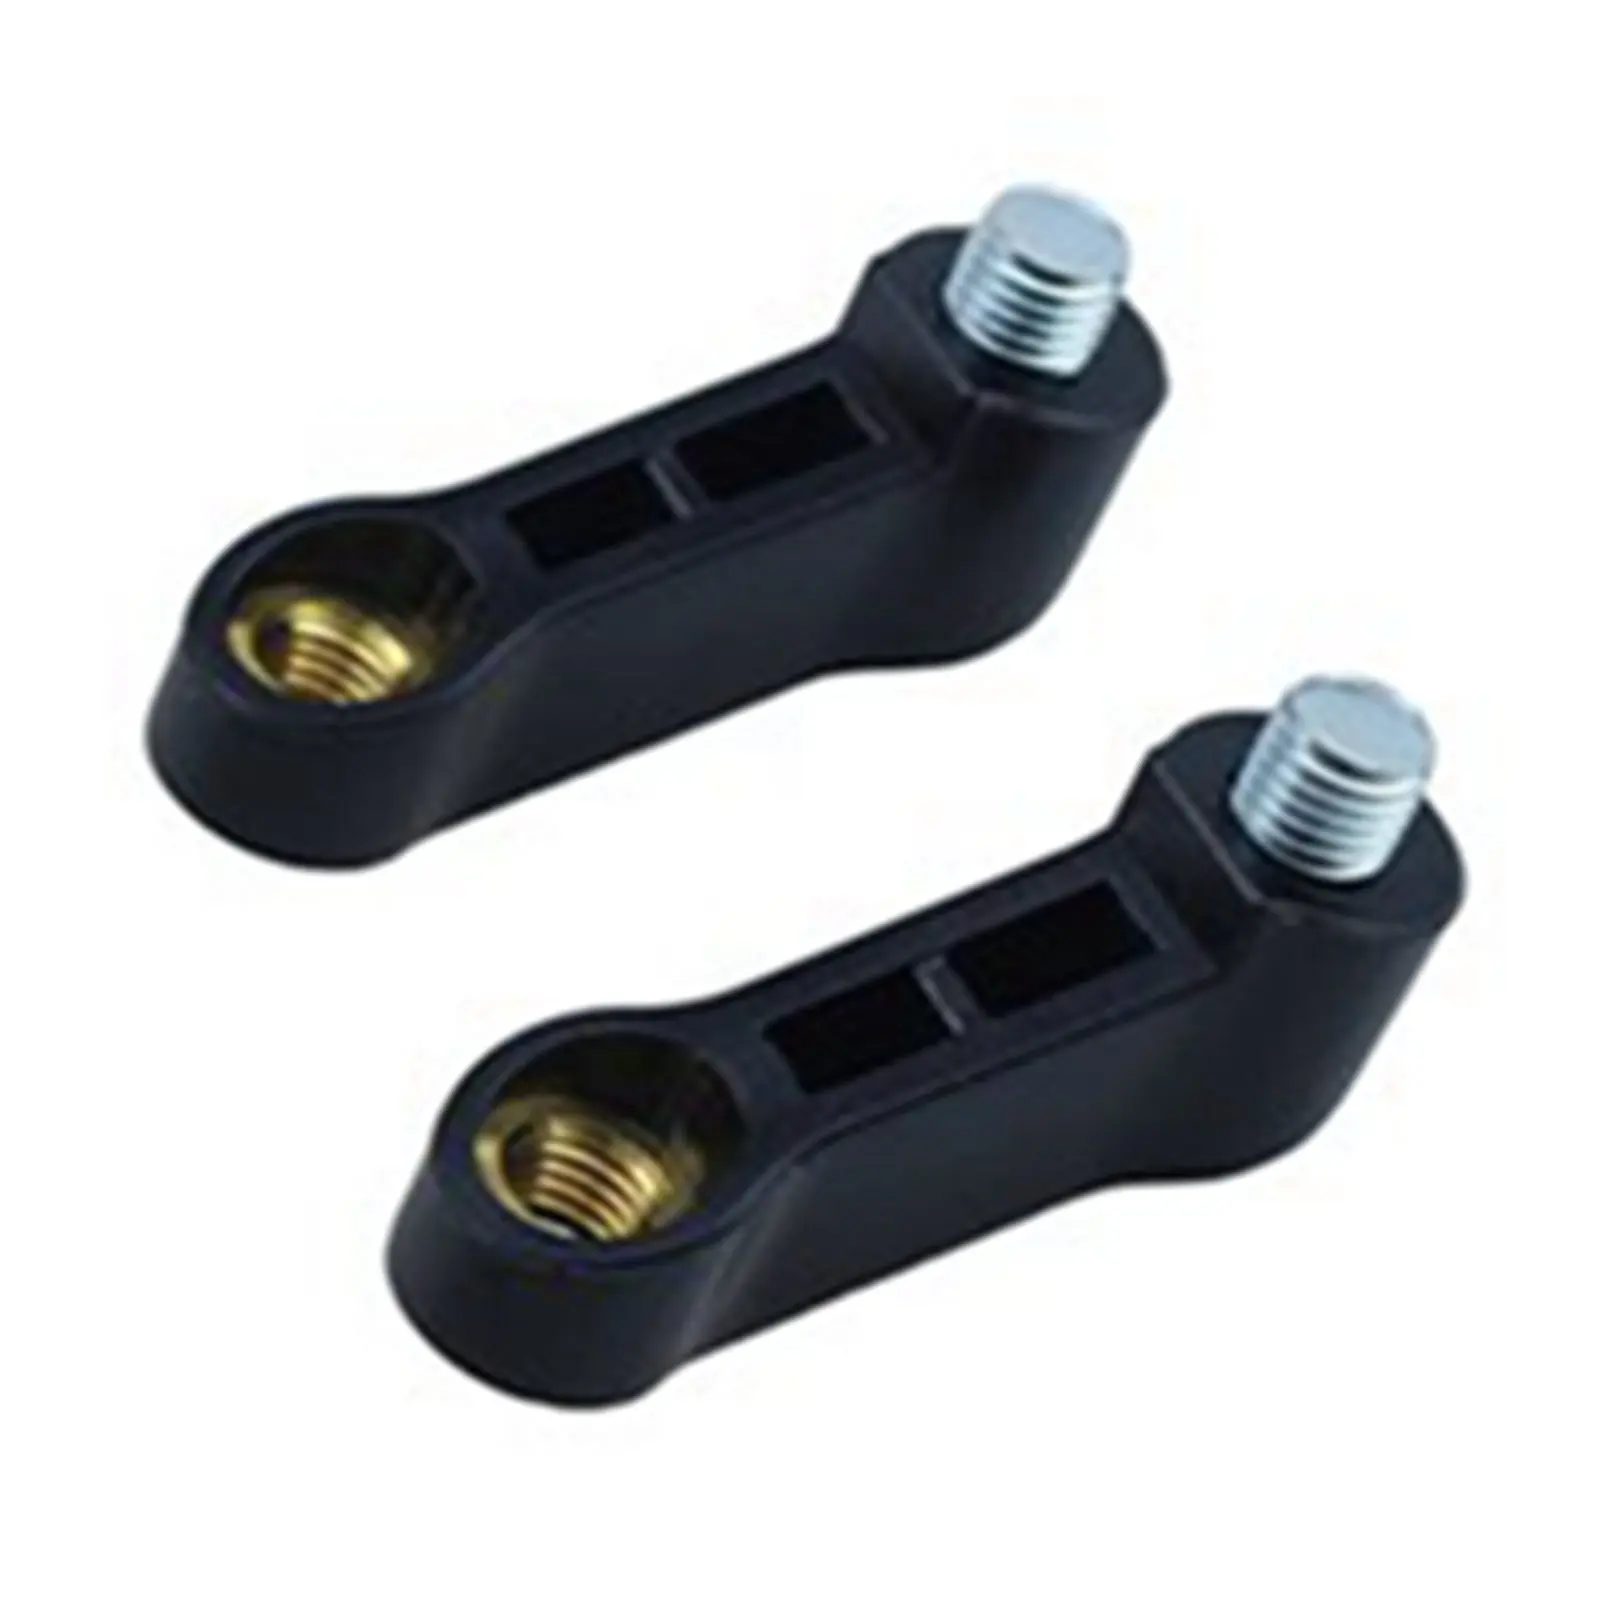 2 Pcs 10mm Motorcycle Rear View Mirror Mount Riser Extender Adapter Black high reliability and high performance